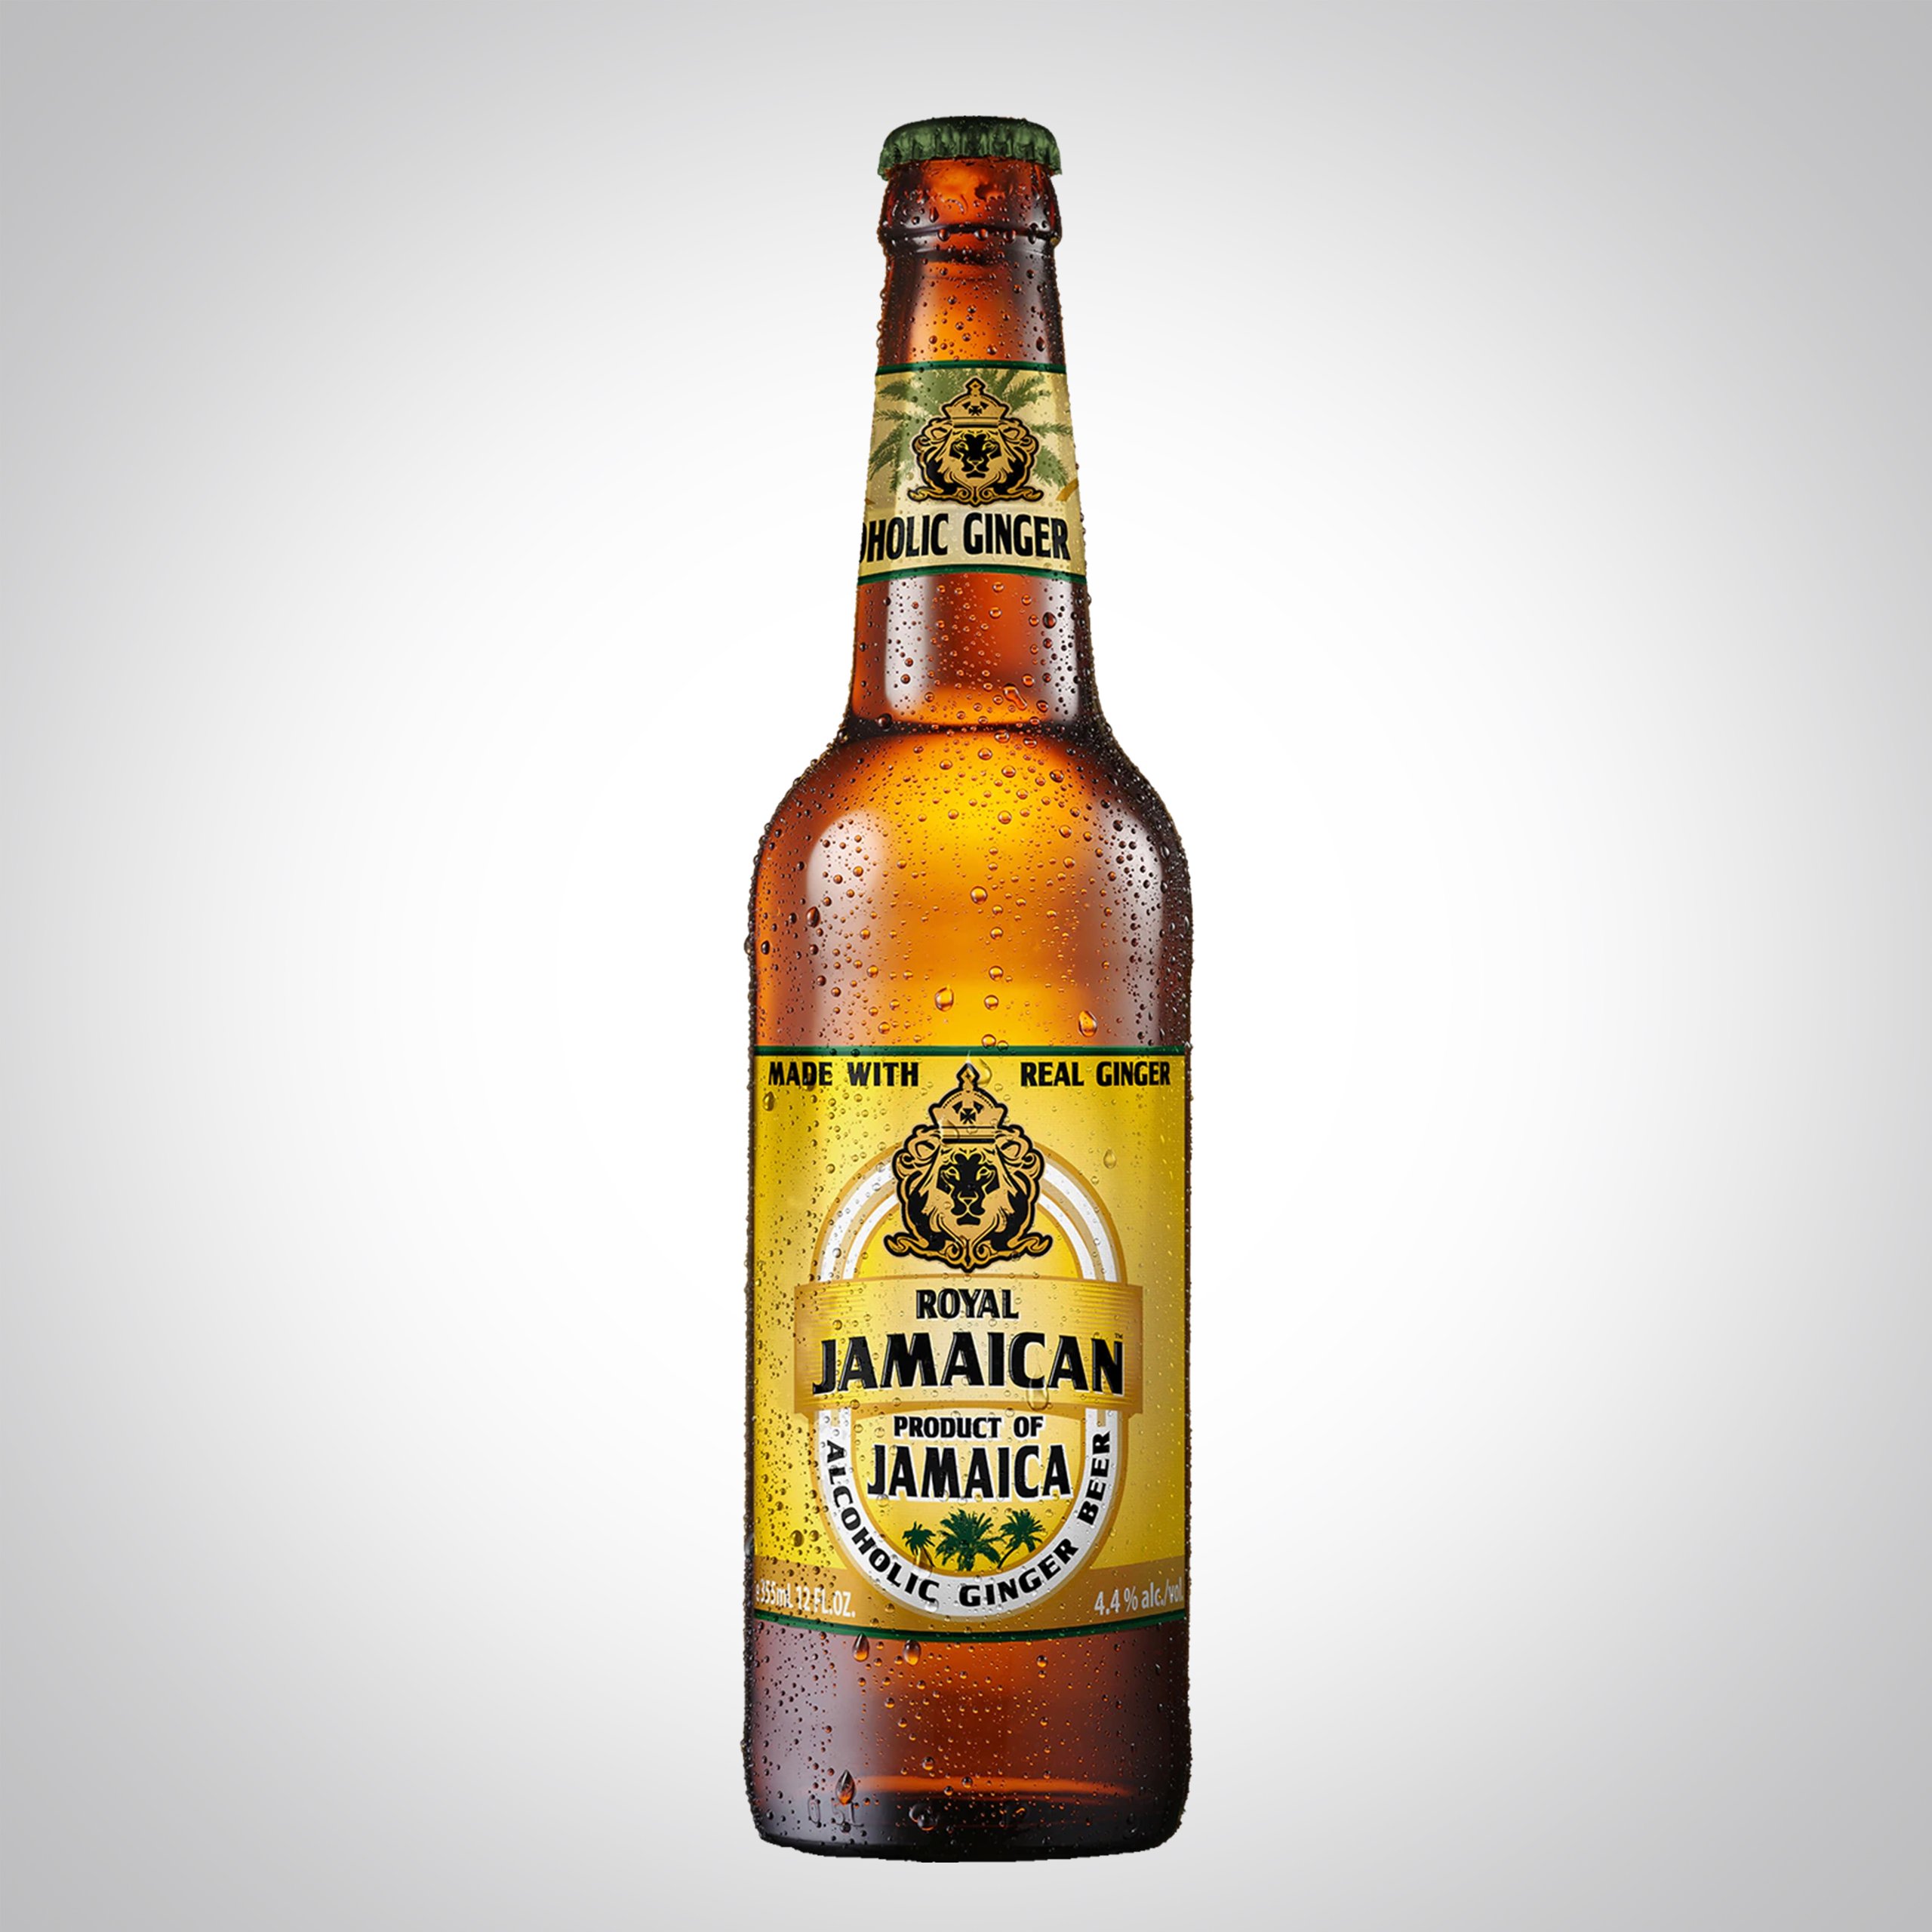 The Jamaican ginger beer